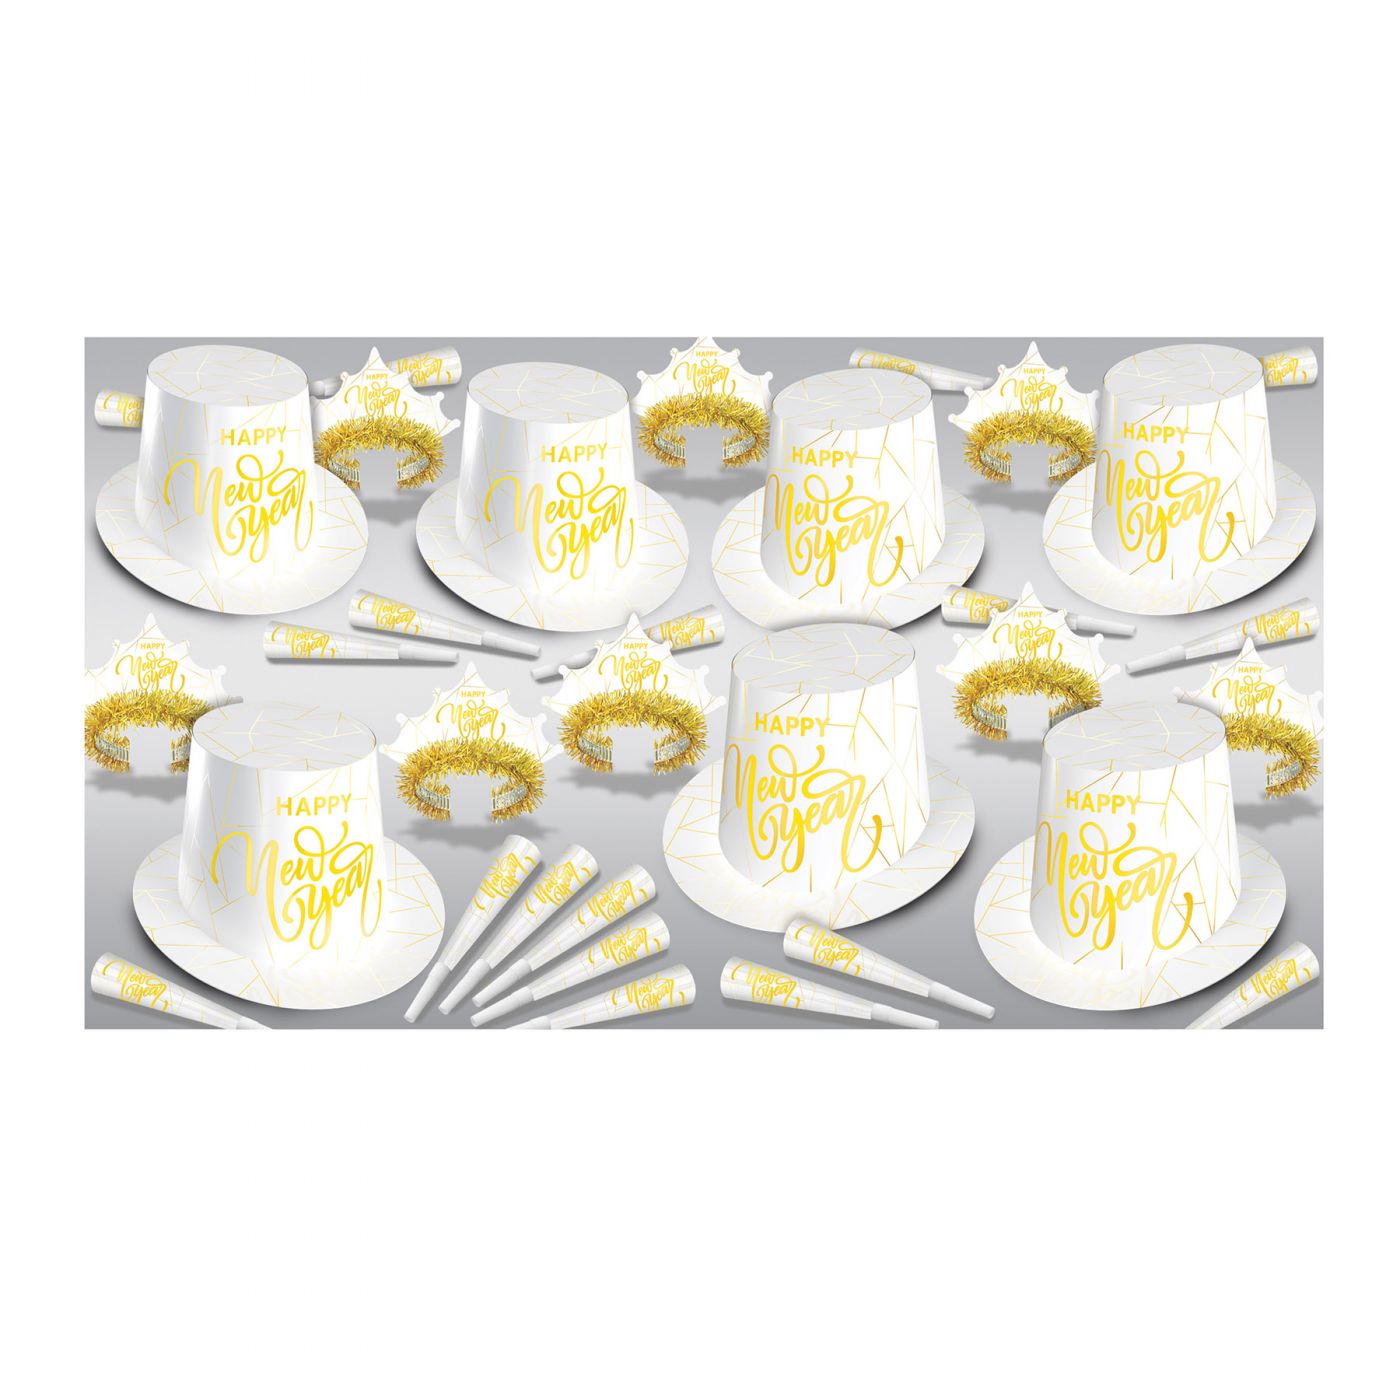 White New Year Gold Assortment for 50 (1) image